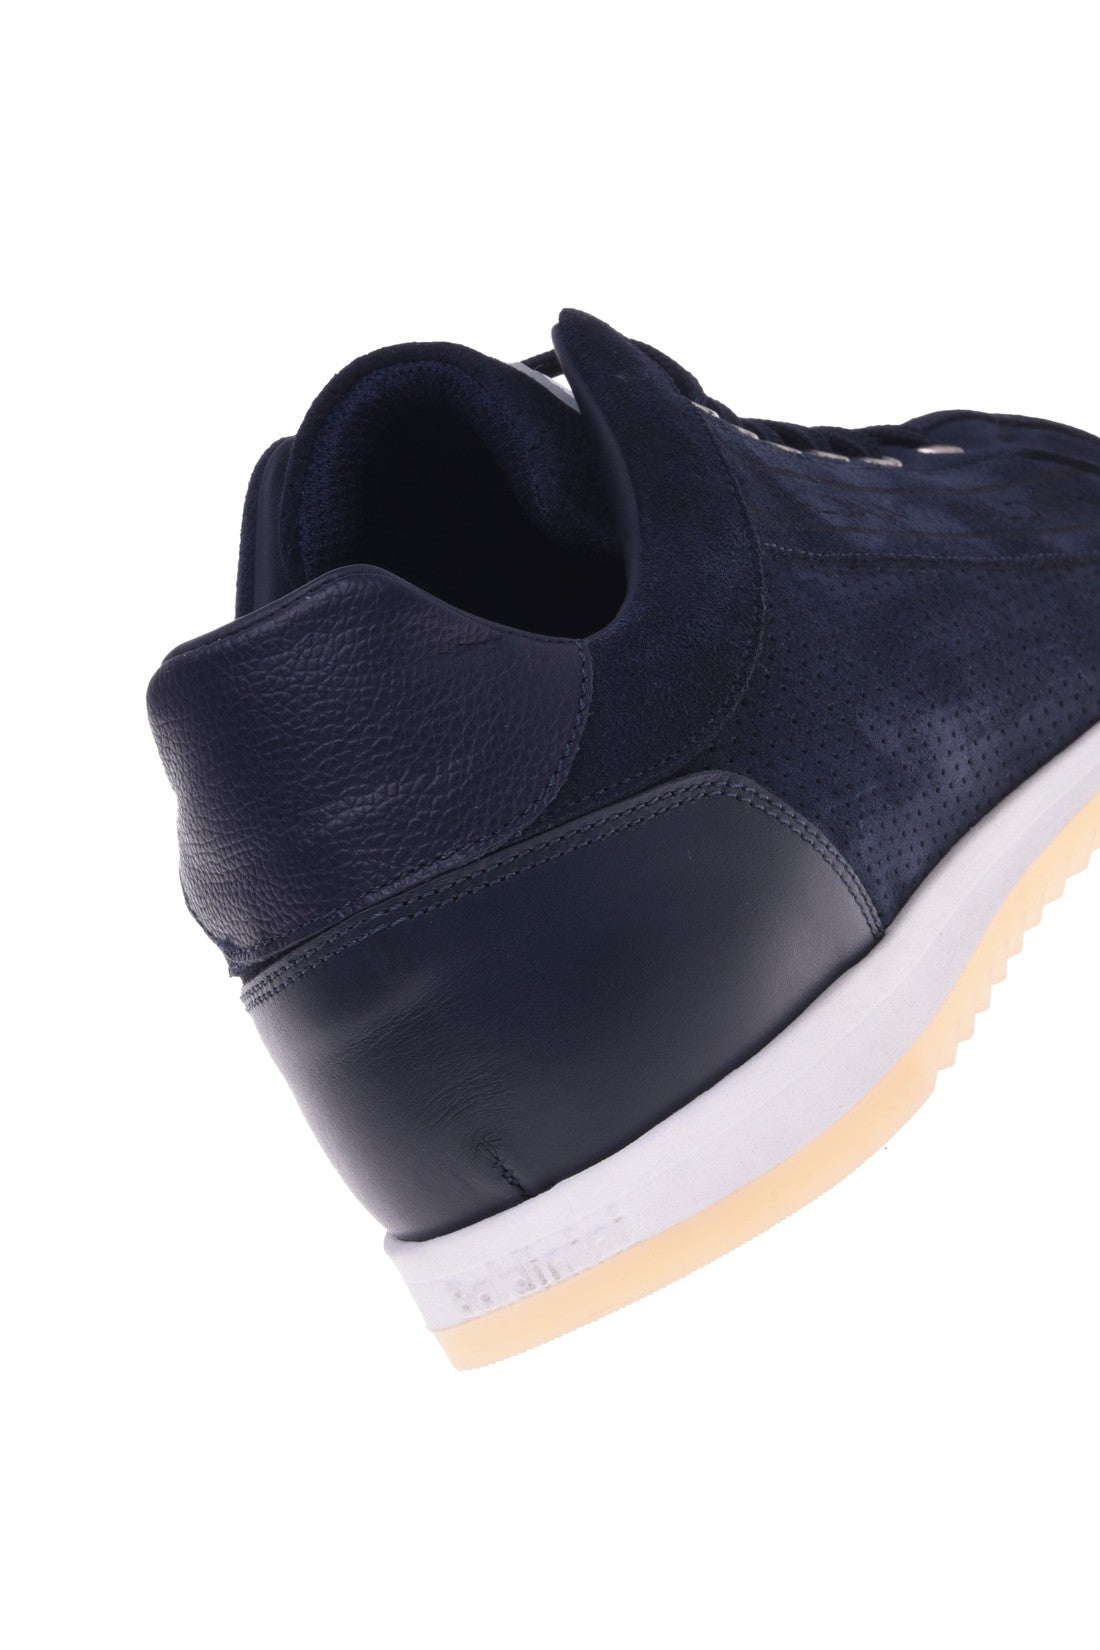 Sneaker in blue perforated suede